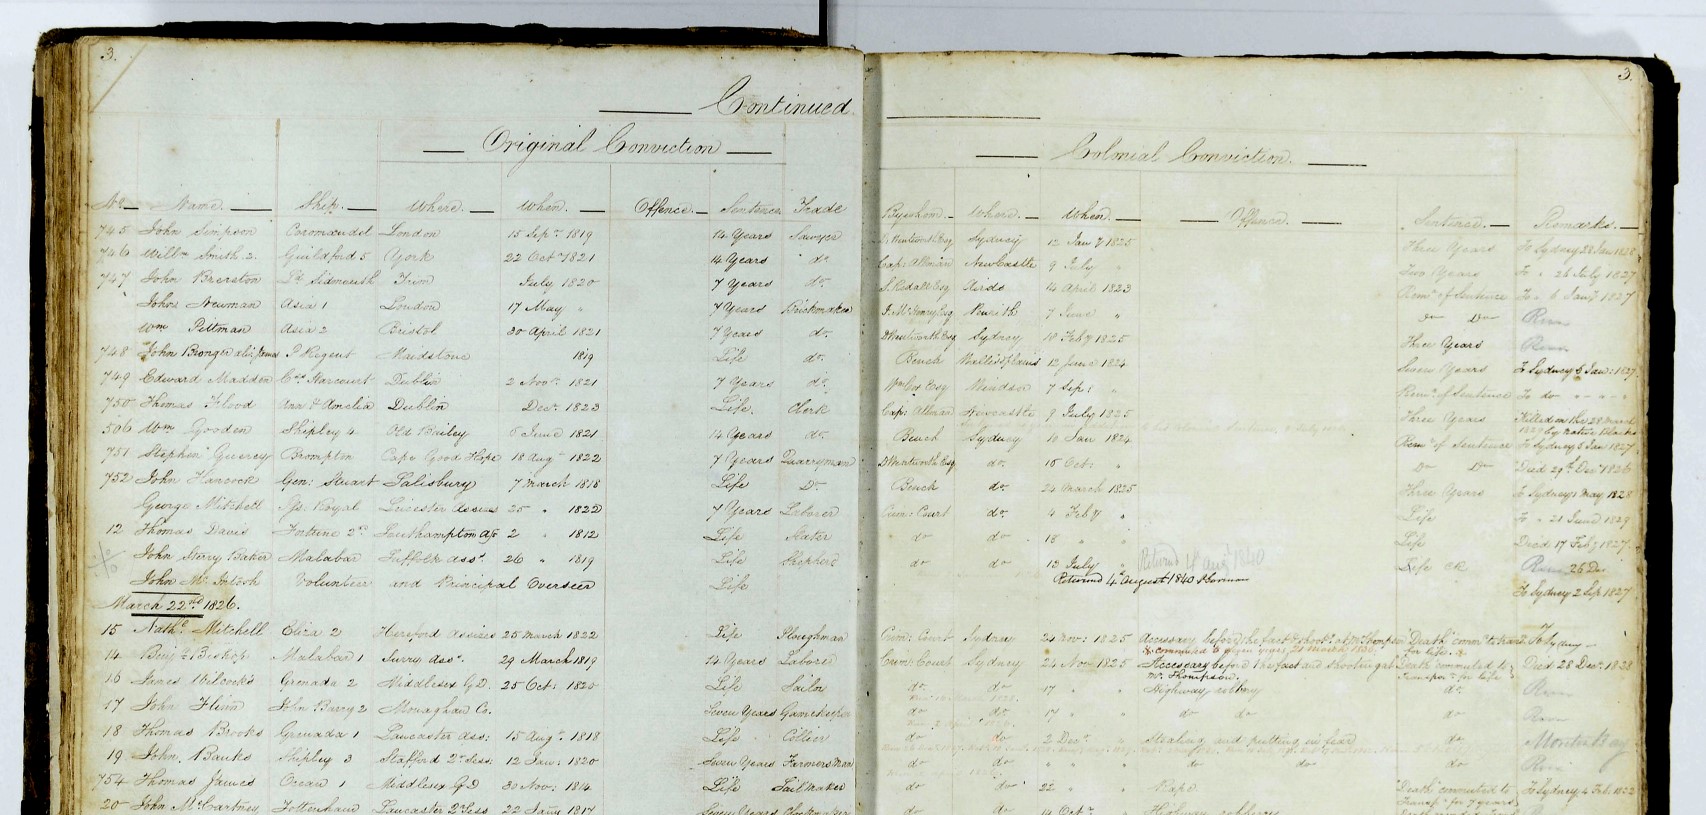 Entry for John Mcintosh in the Chronological Register of Convicts. Source: Queensland State Archives, Item ID ITM869689.